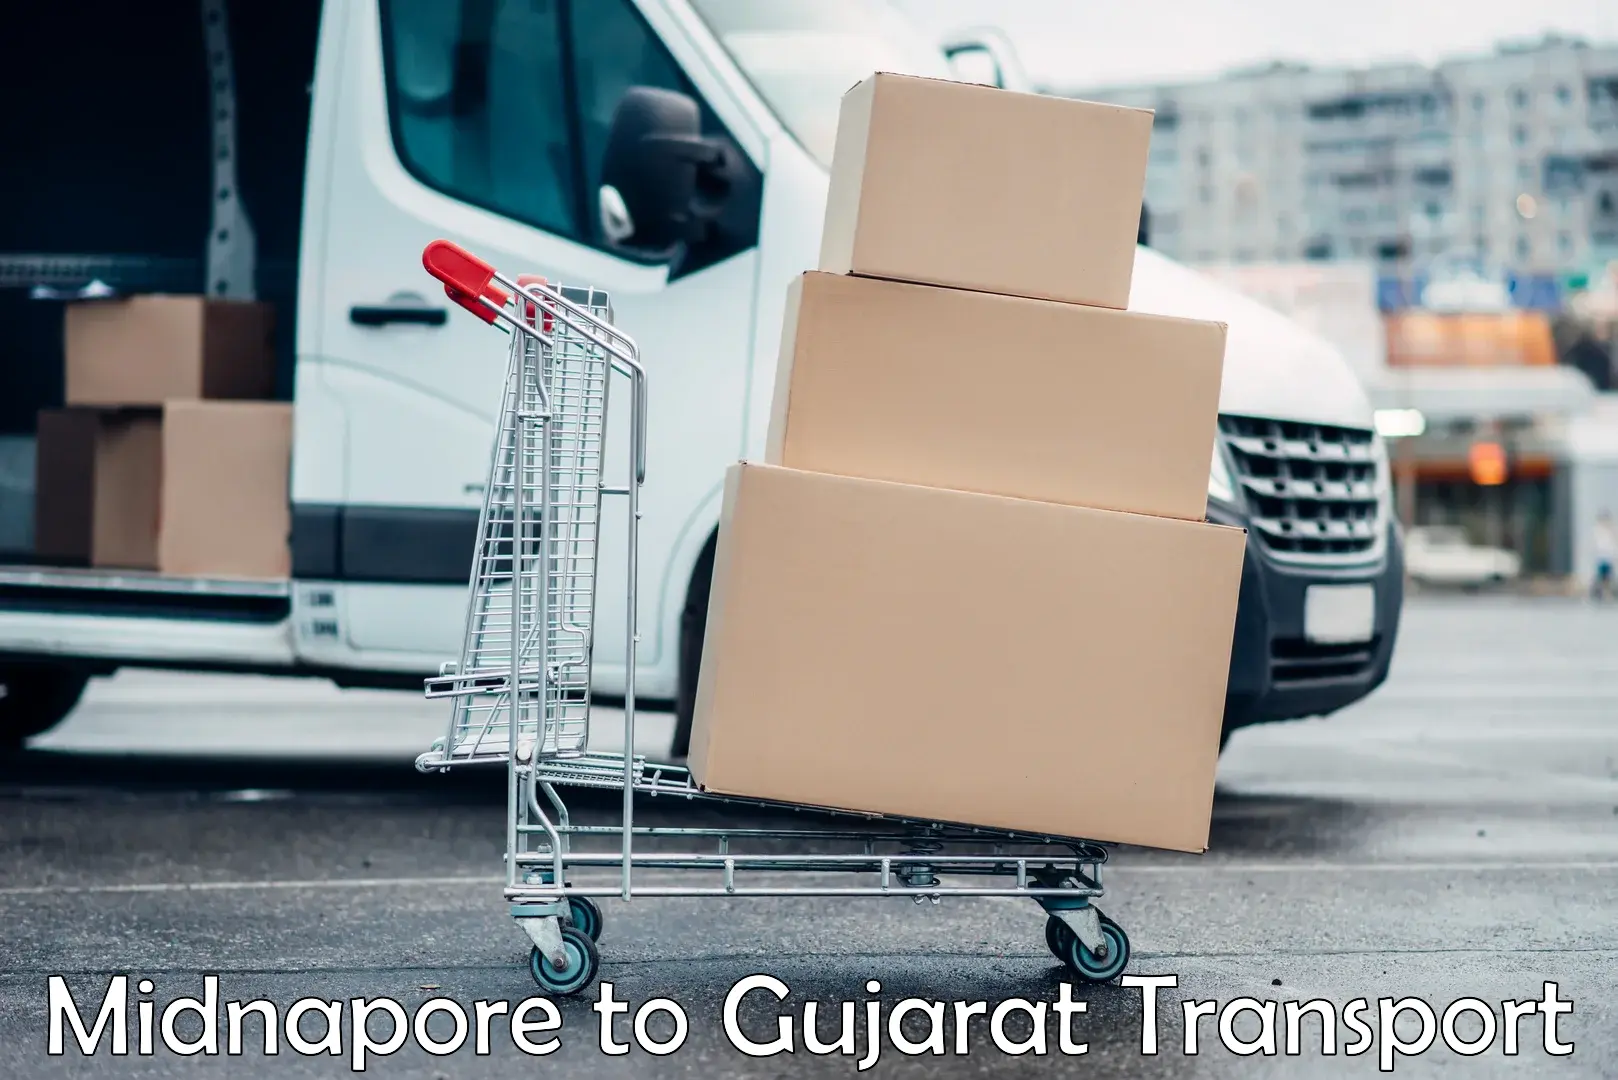 Daily transport service Midnapore to Dholera